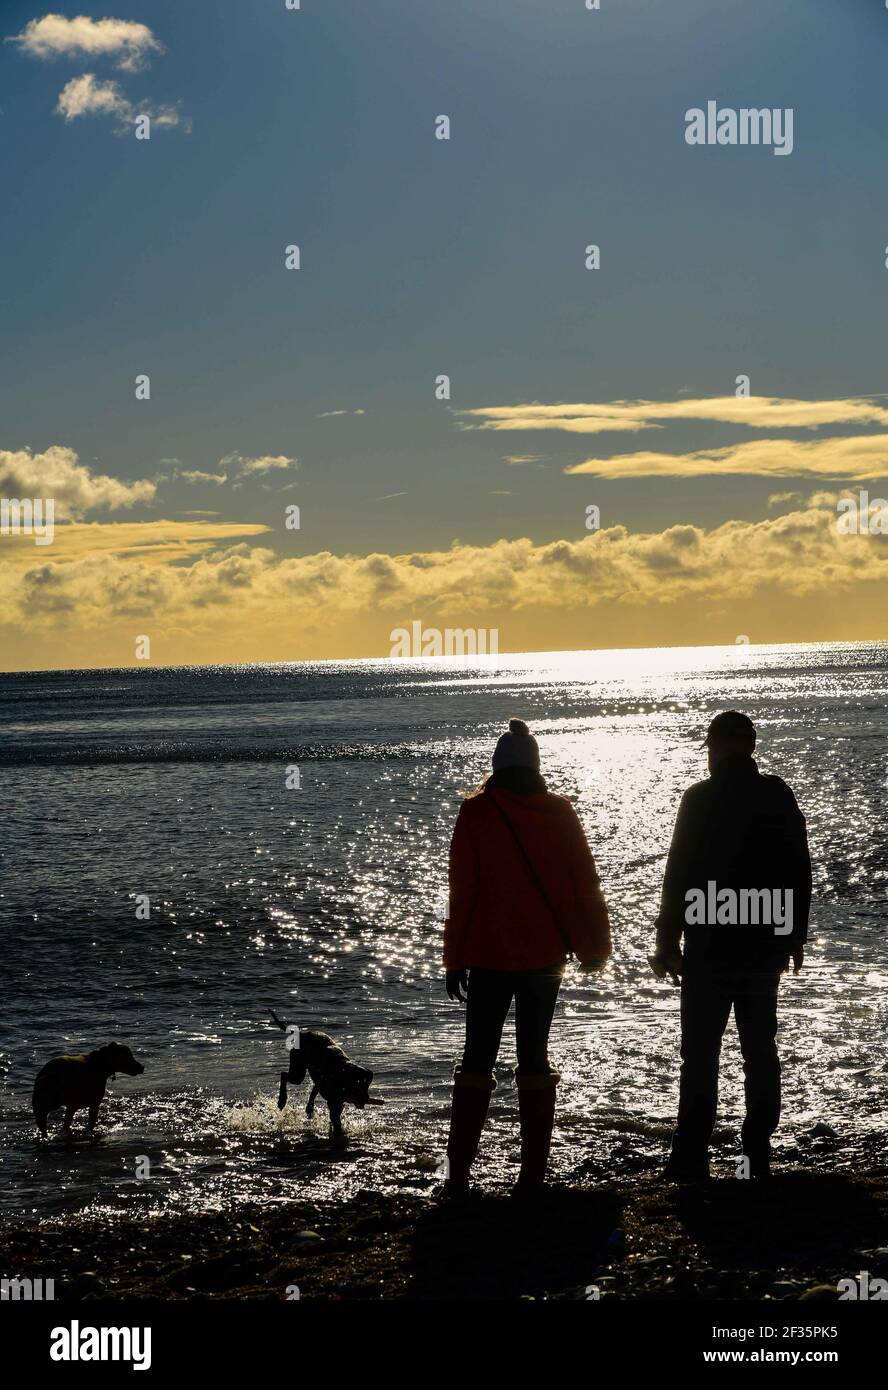 Two people walking two dogs on a beach at sunset by the sea Stock Photo